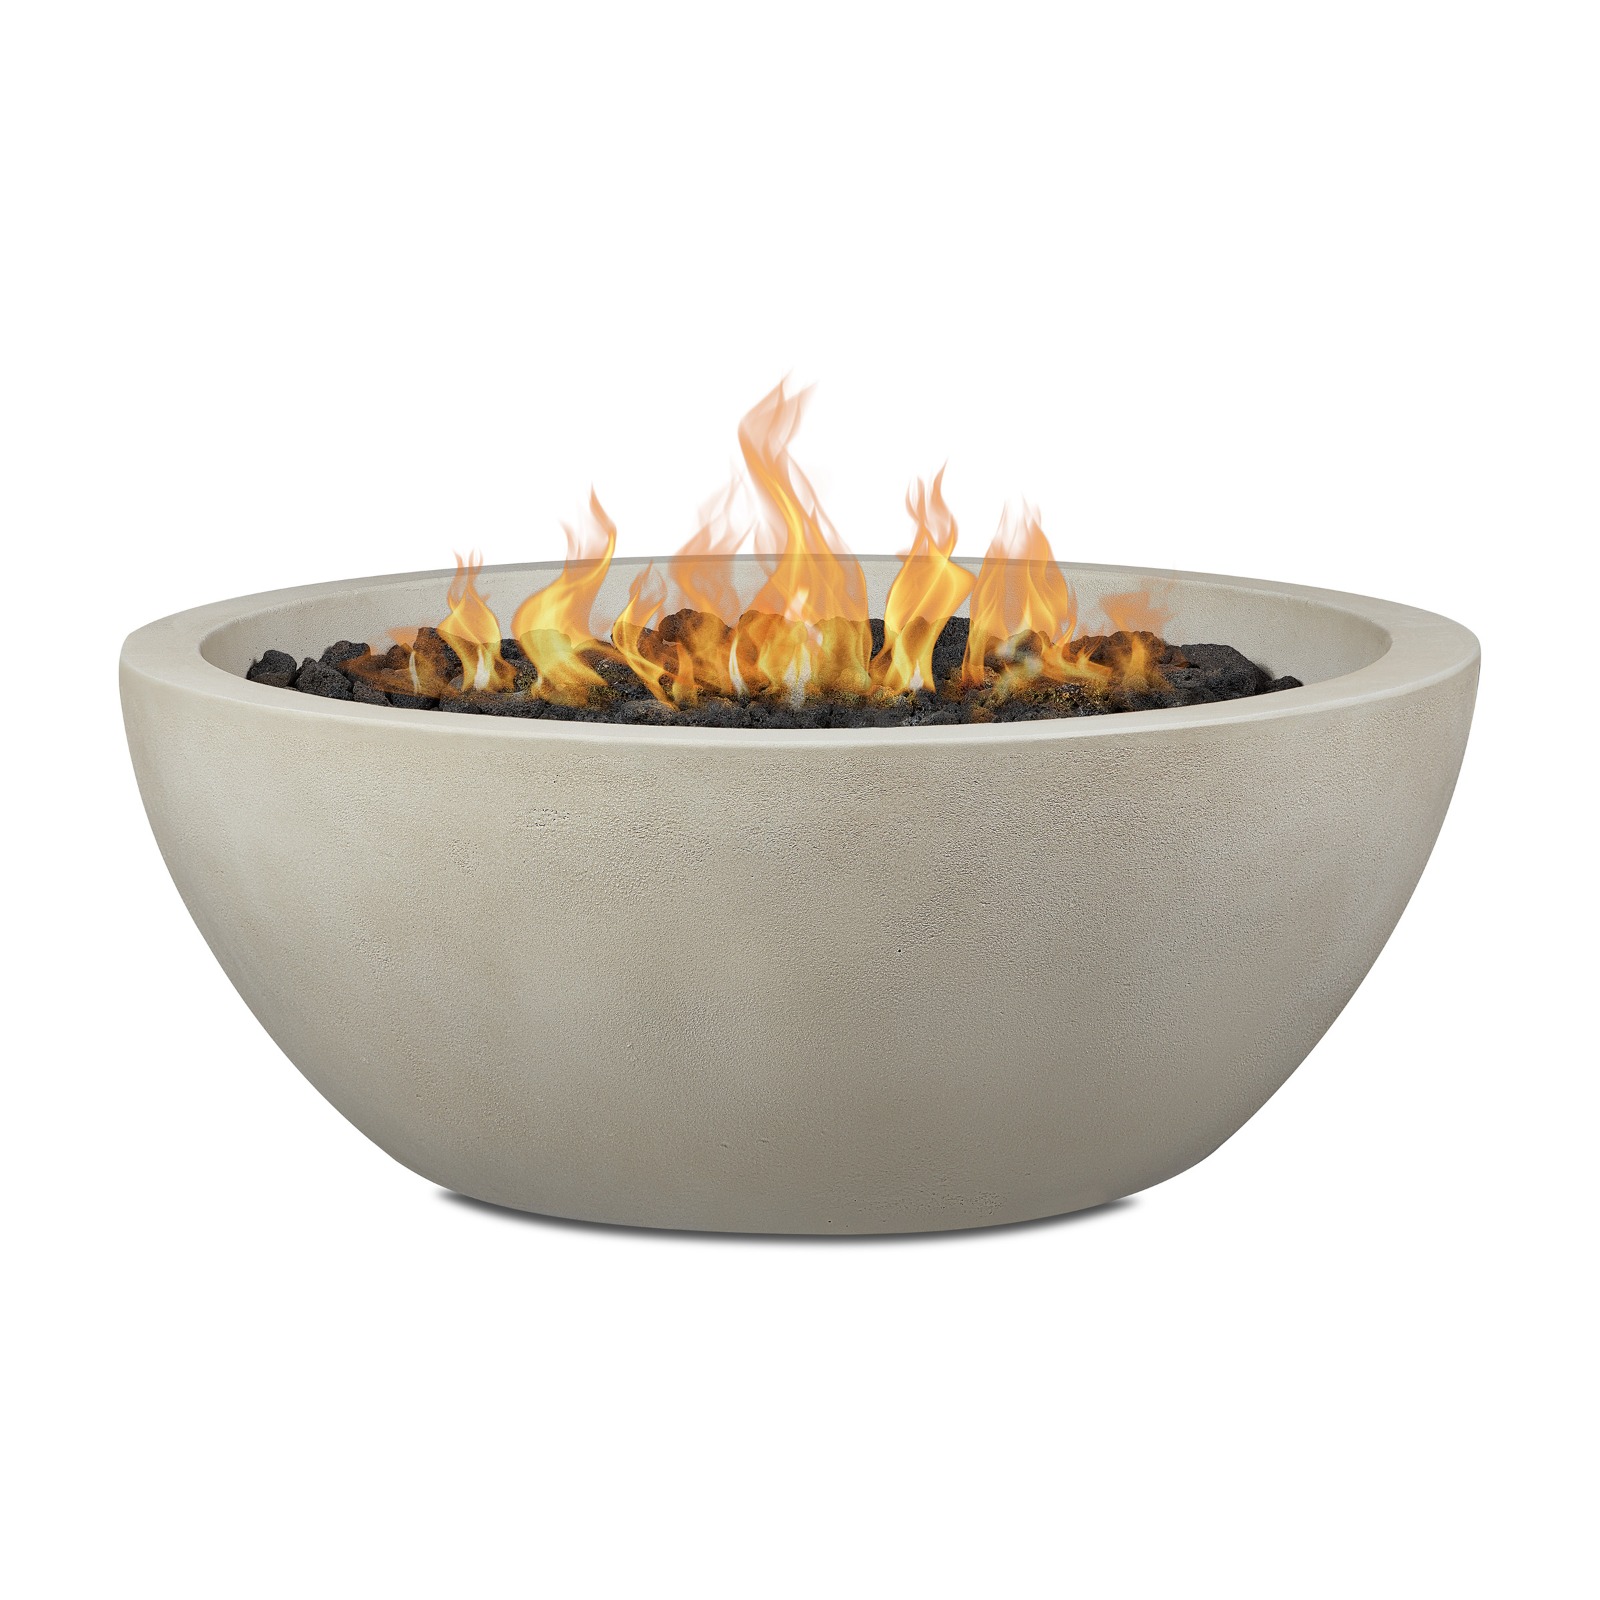 Eldora 42" GFRC Propane Fire Pit Natural Gas Fire Bowl Outdoor Fireplace Fire Table for Backyard or Patio